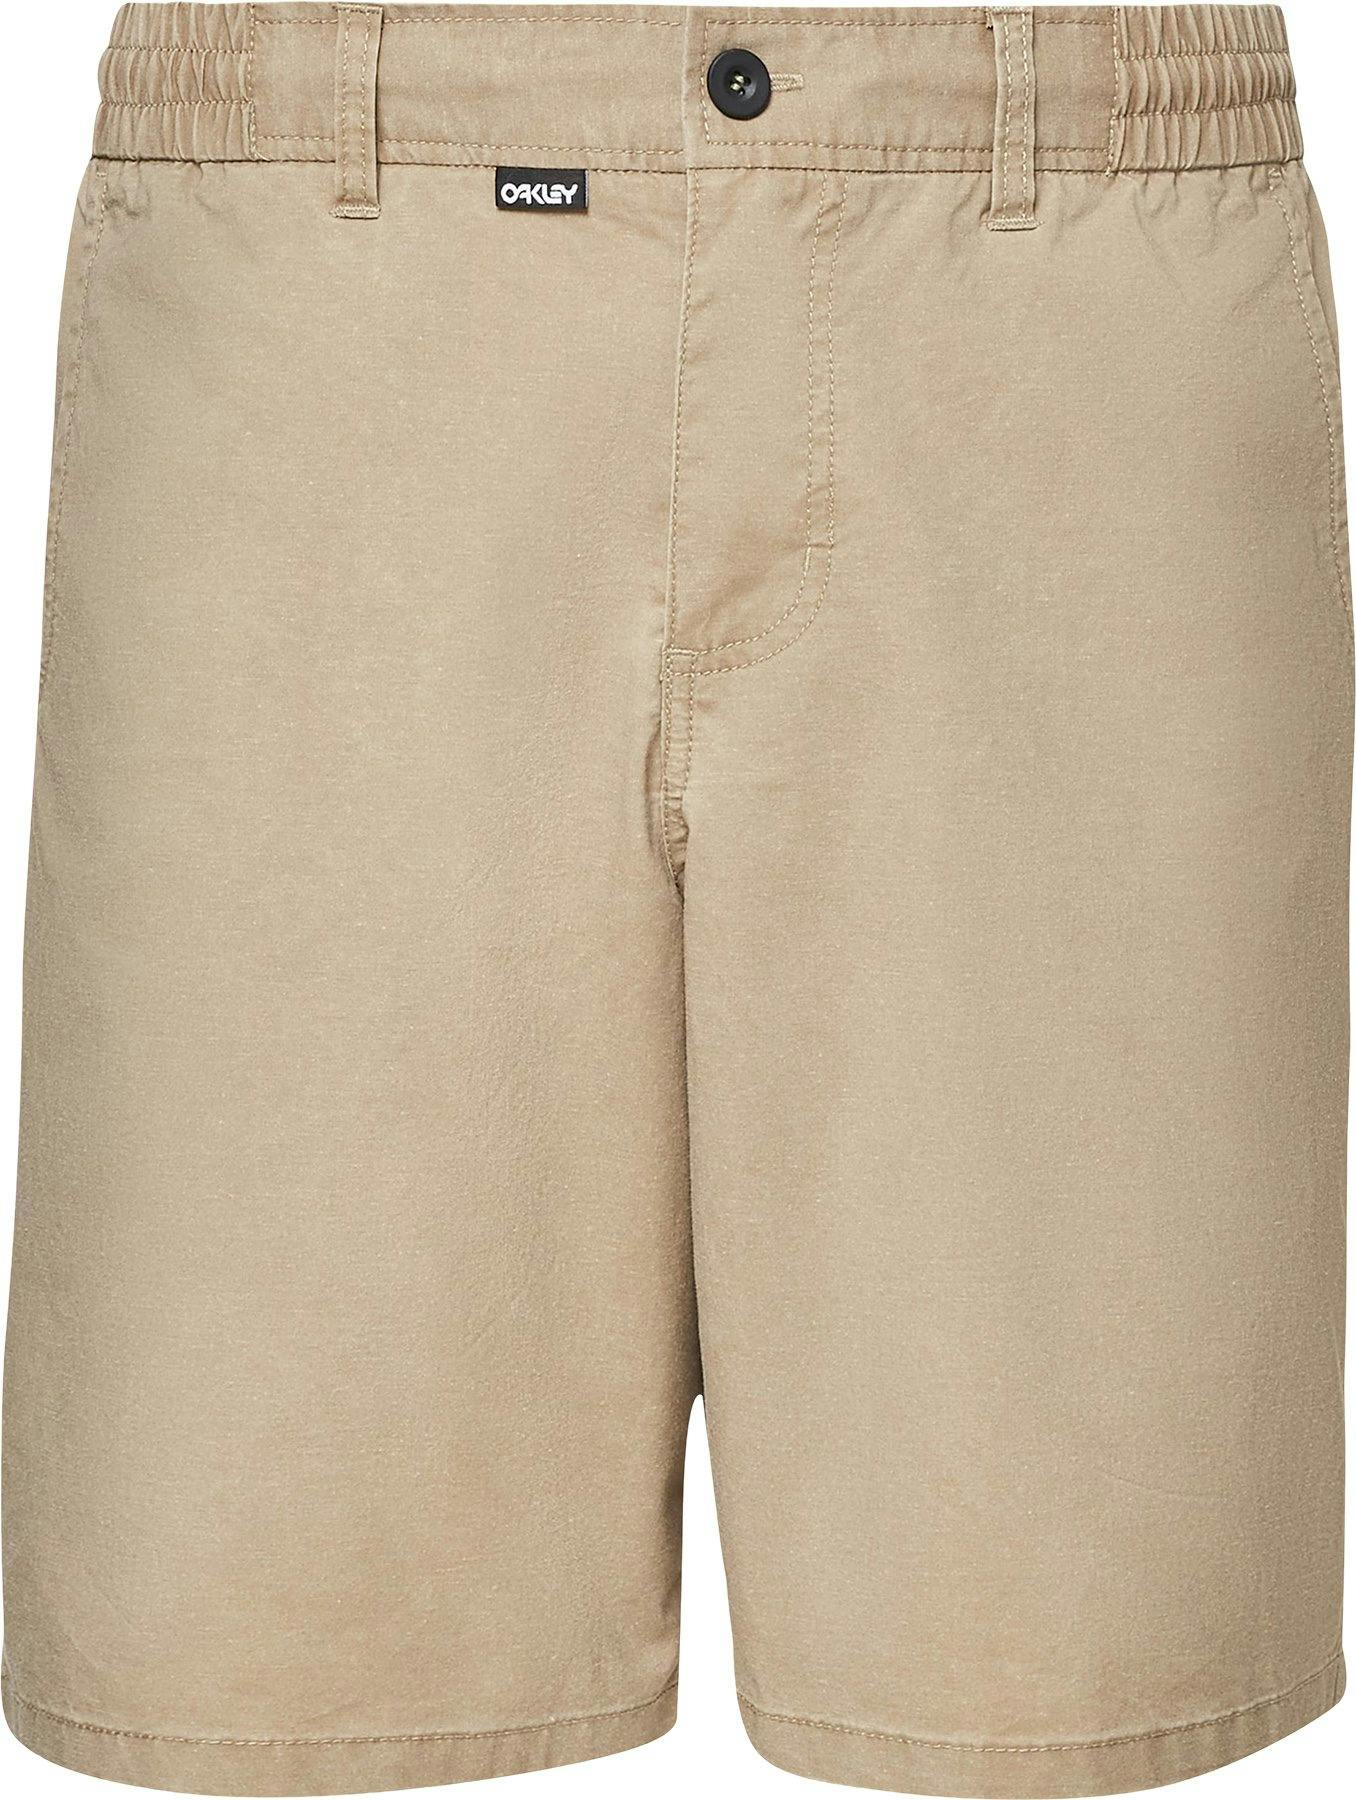 Product image for Chino 19 in Hybrid Short - Men’s